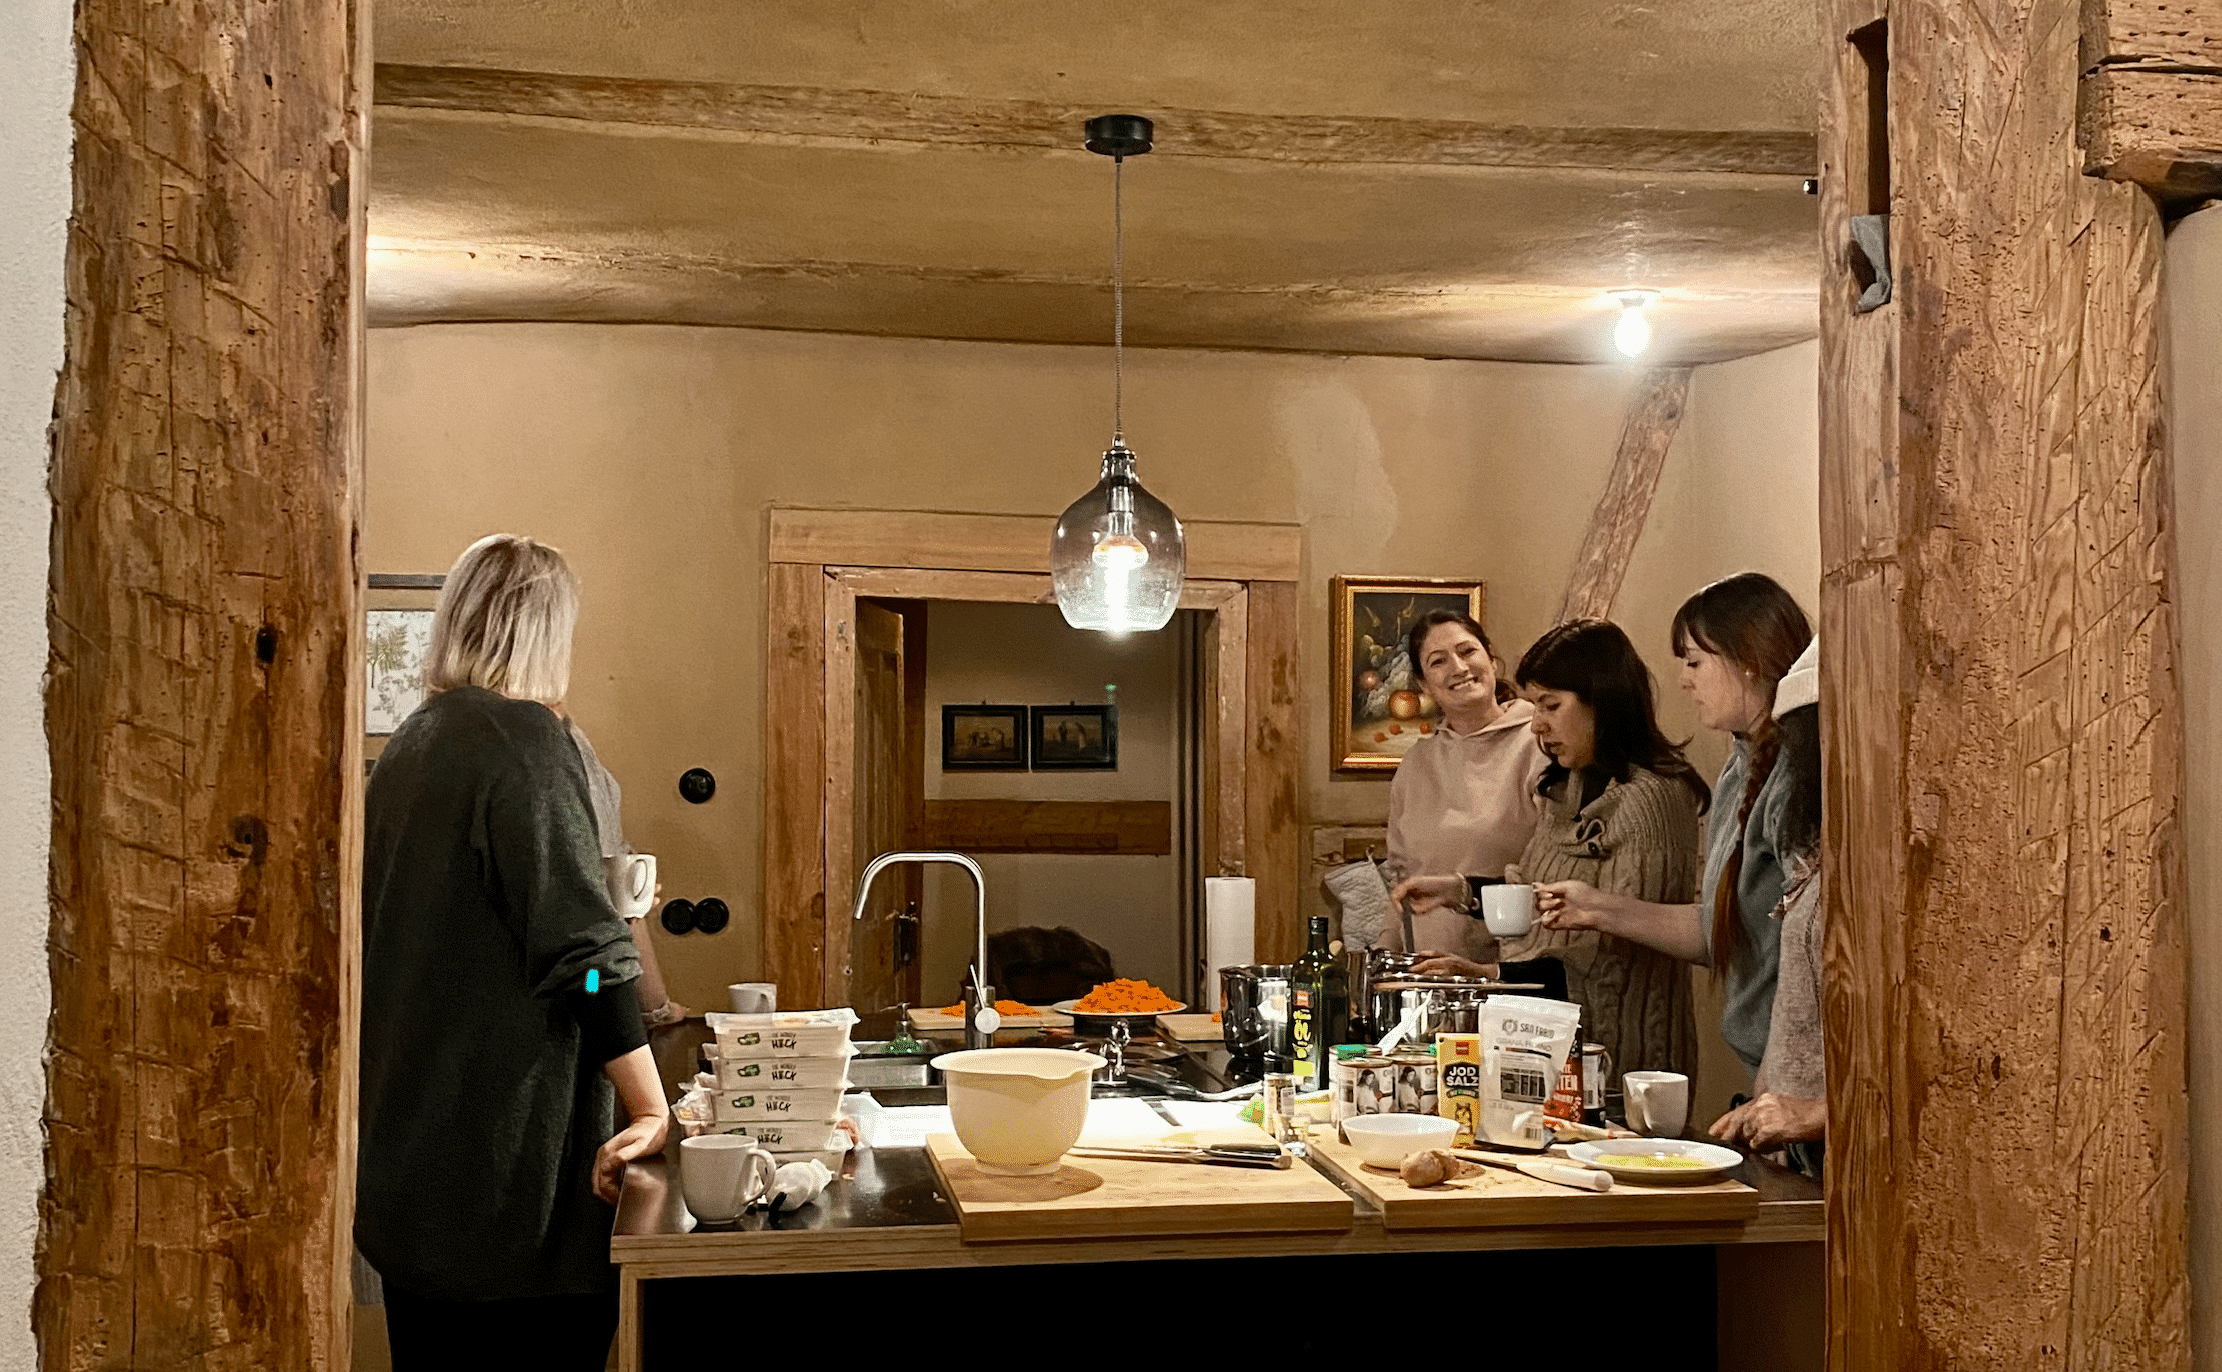 Look into the kitchen, Mashies chatting and laughing at the team retreat